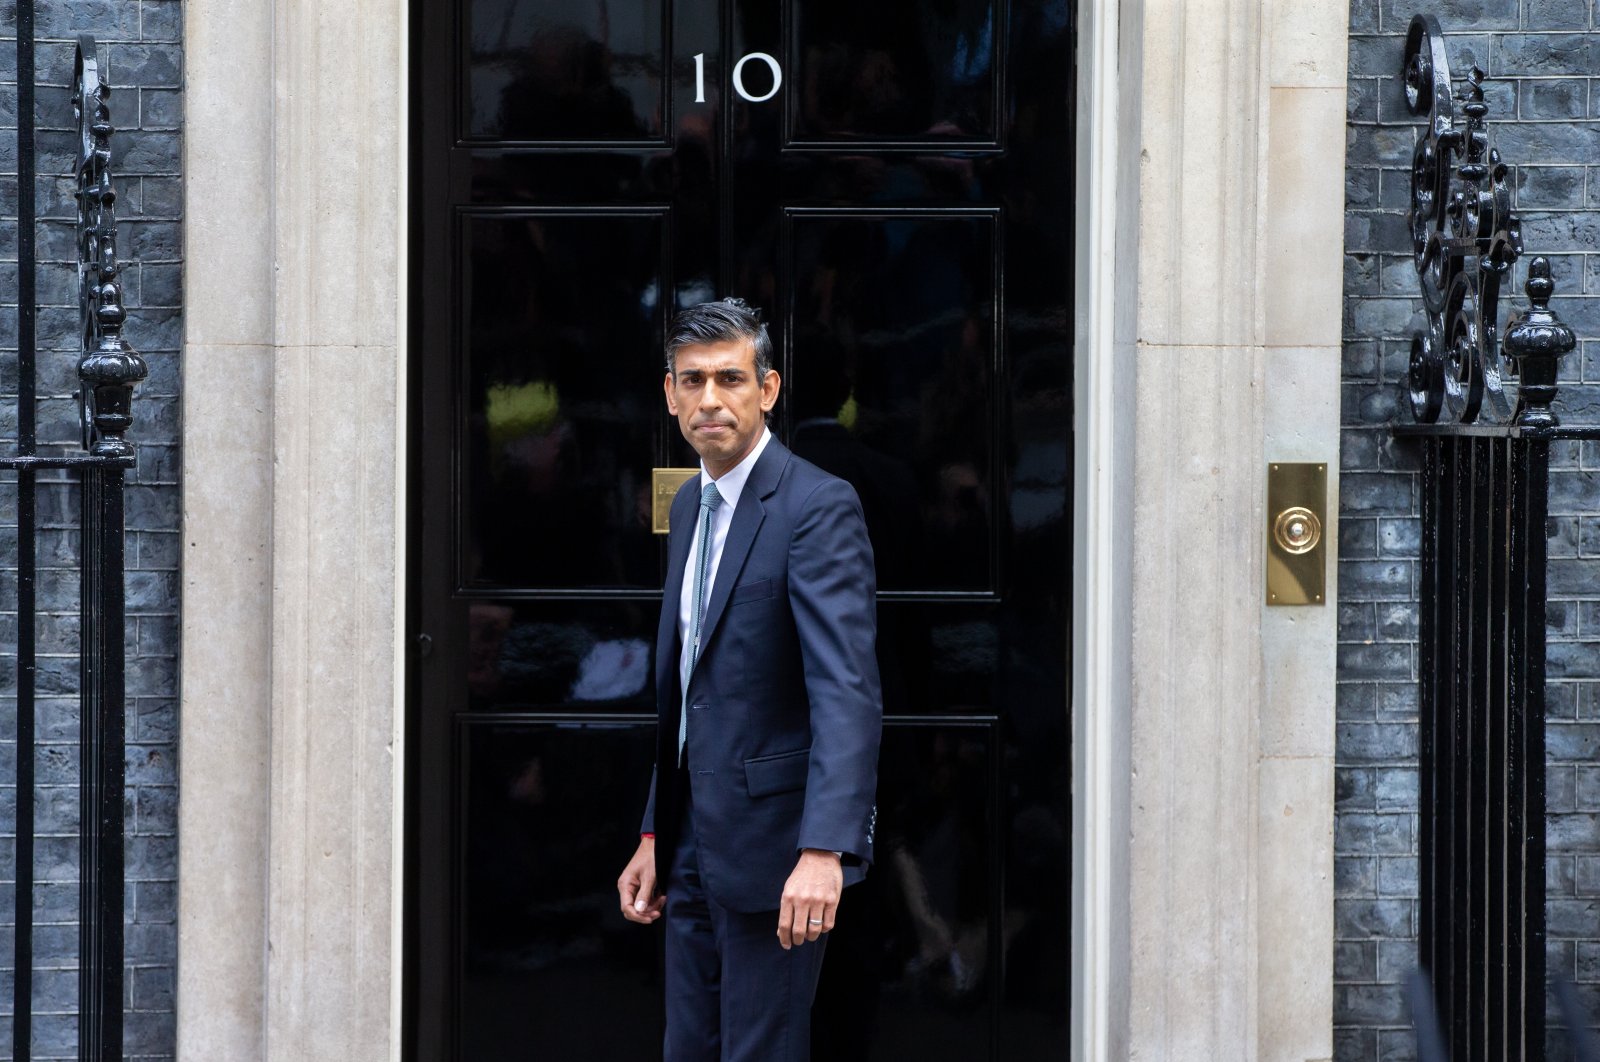 Skyrocketing energy prices and the battle against inflation, which has reached its peak in the last 40 years, are at the top of newly-elected U.K. Prime Minister Rishi Sunak’s agenda. (Shutterstock Photo)